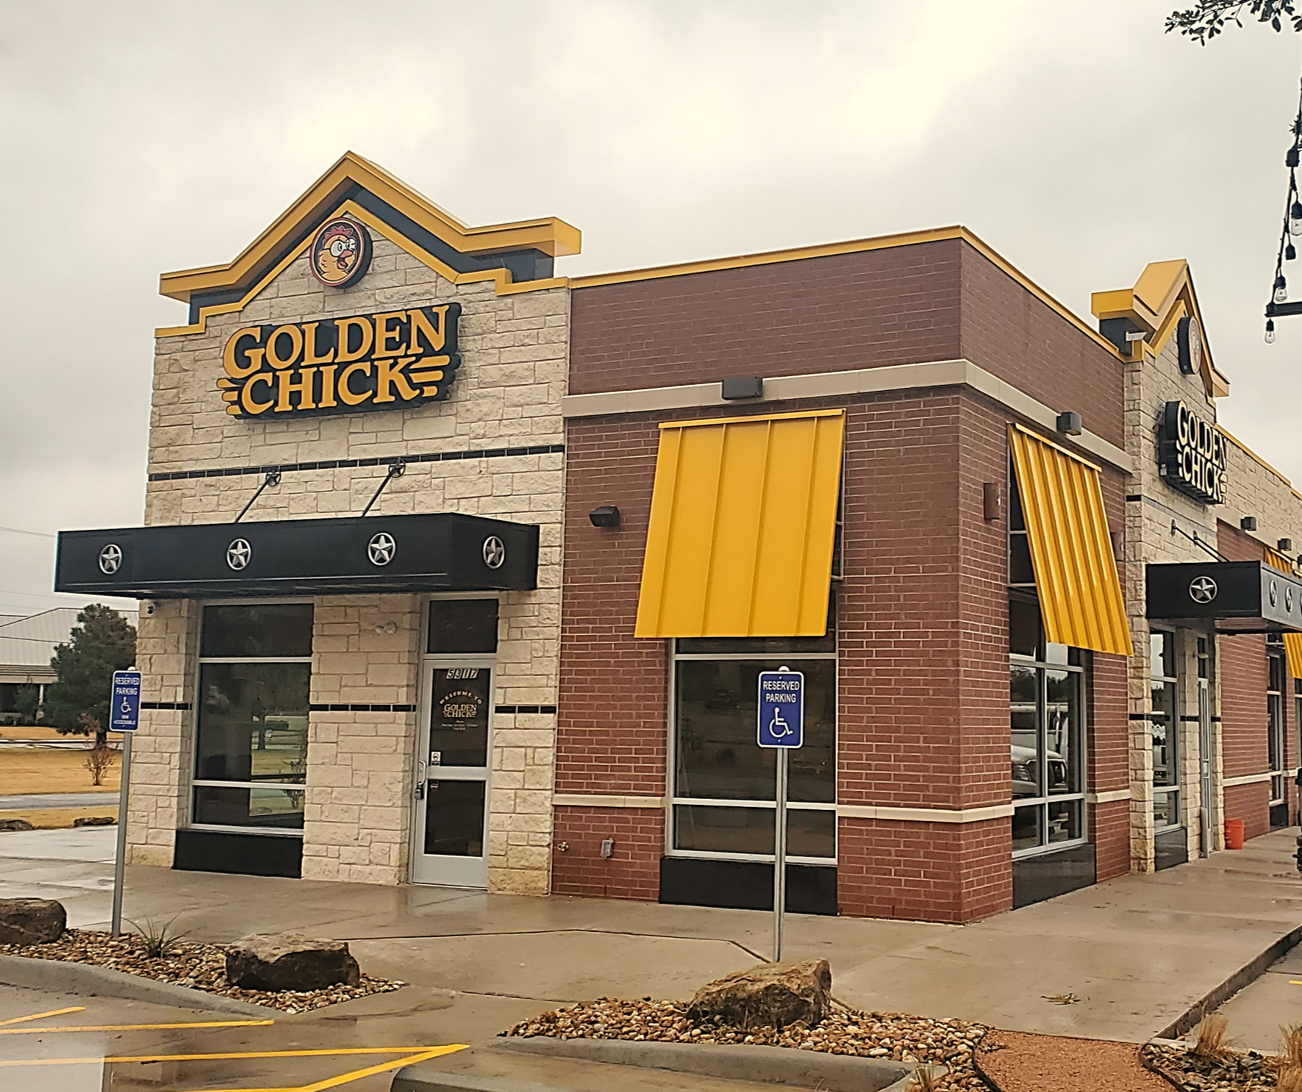 Golden Chick storefront.  Your local Golden Chick fast food restaurant in Abilene, Texas